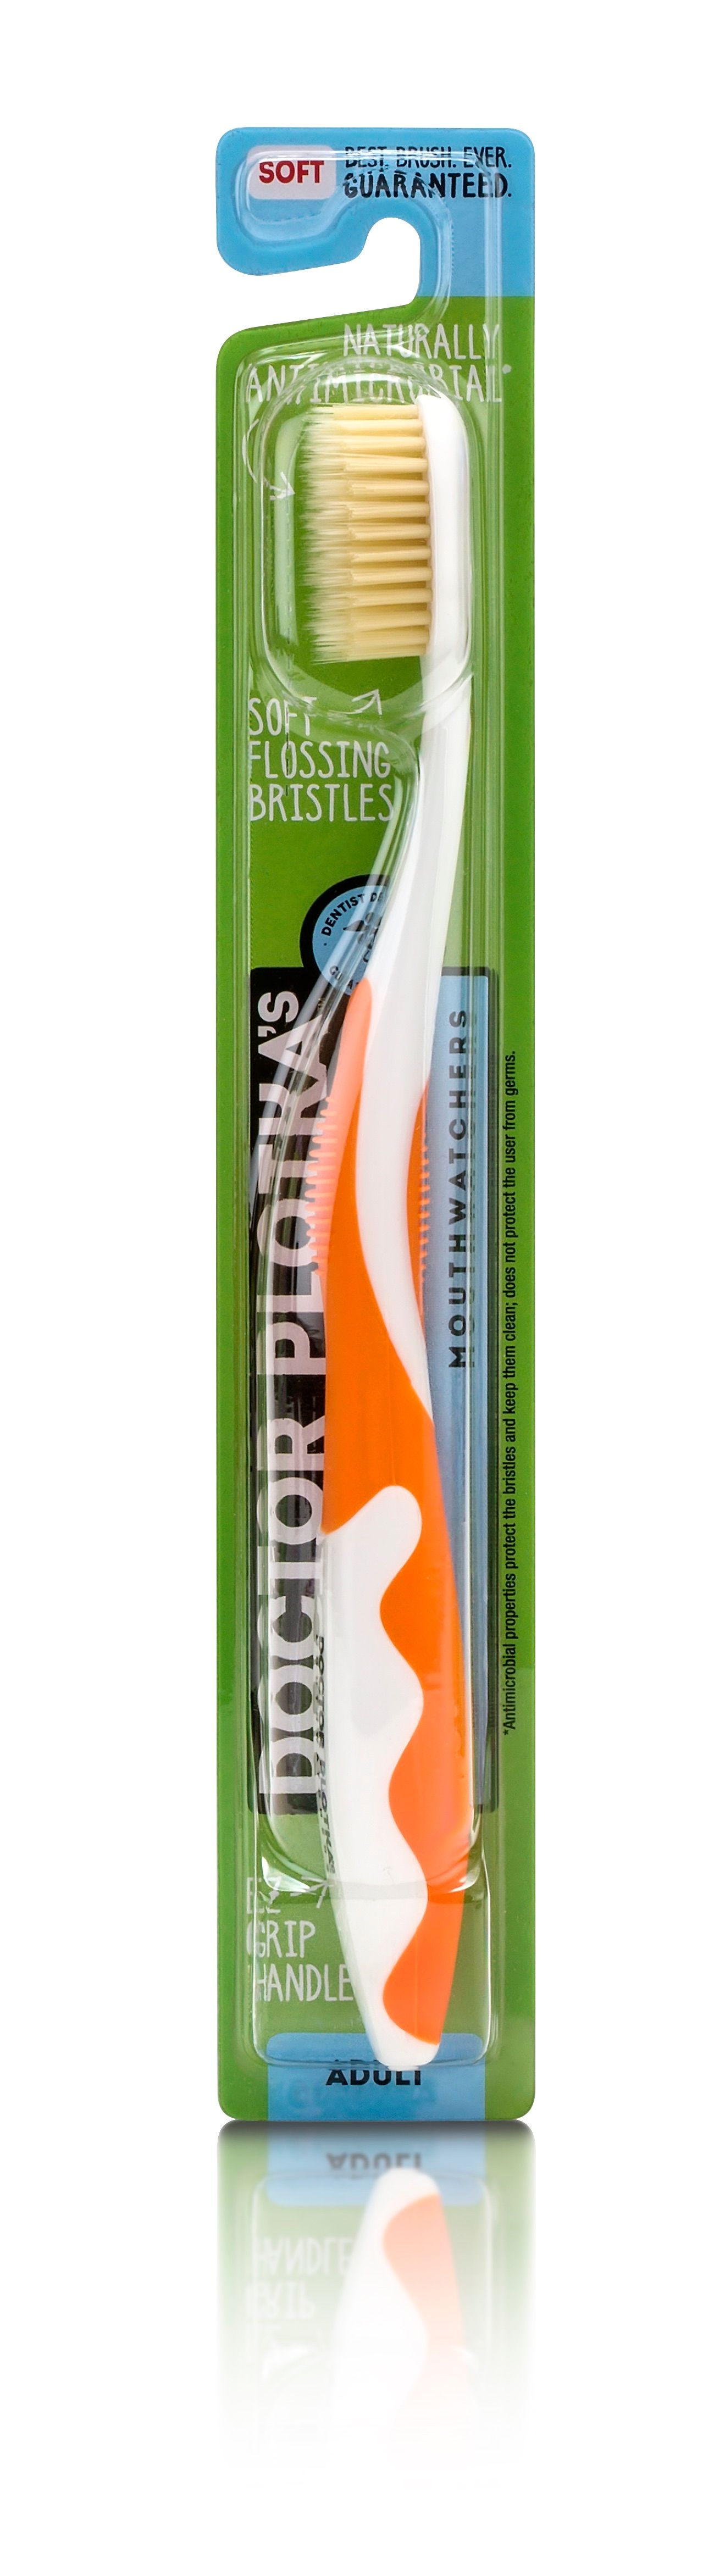 230628 Mouth Watchers Antimicrobial Adult Soft Toothbrushes, Orange